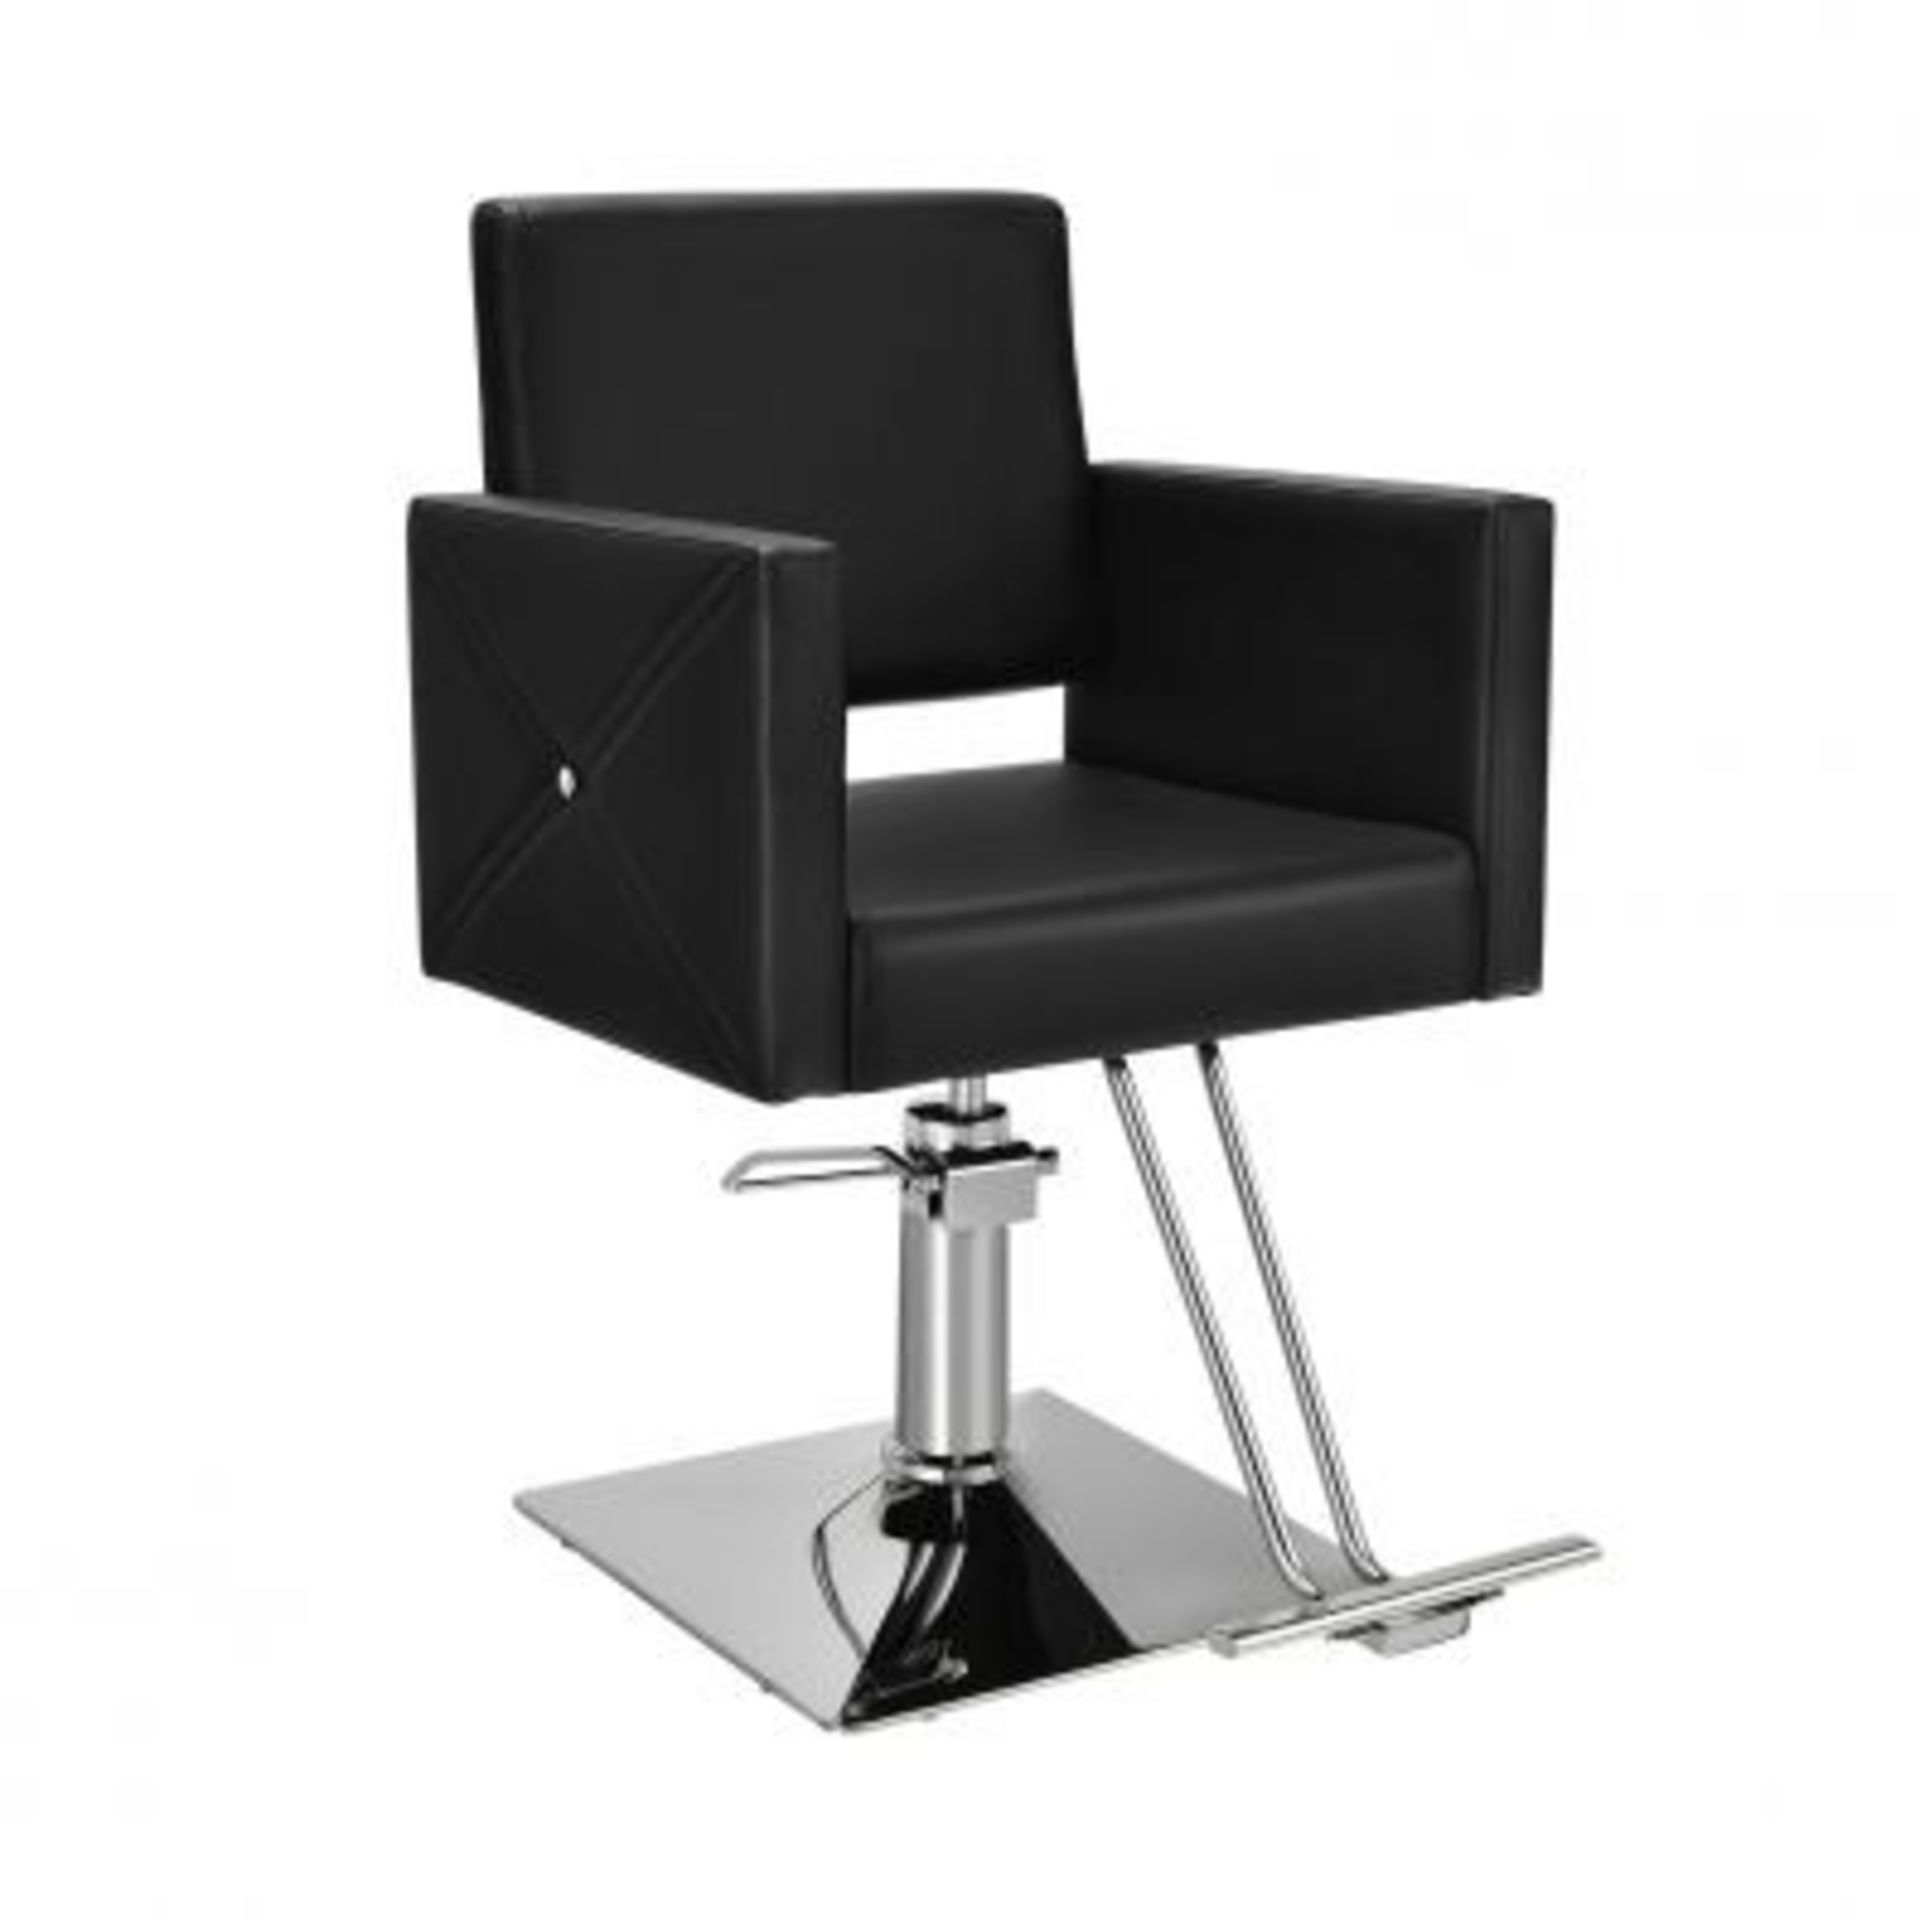 360 Degree Swivel Hairdressing Chair with Footrest - ER54